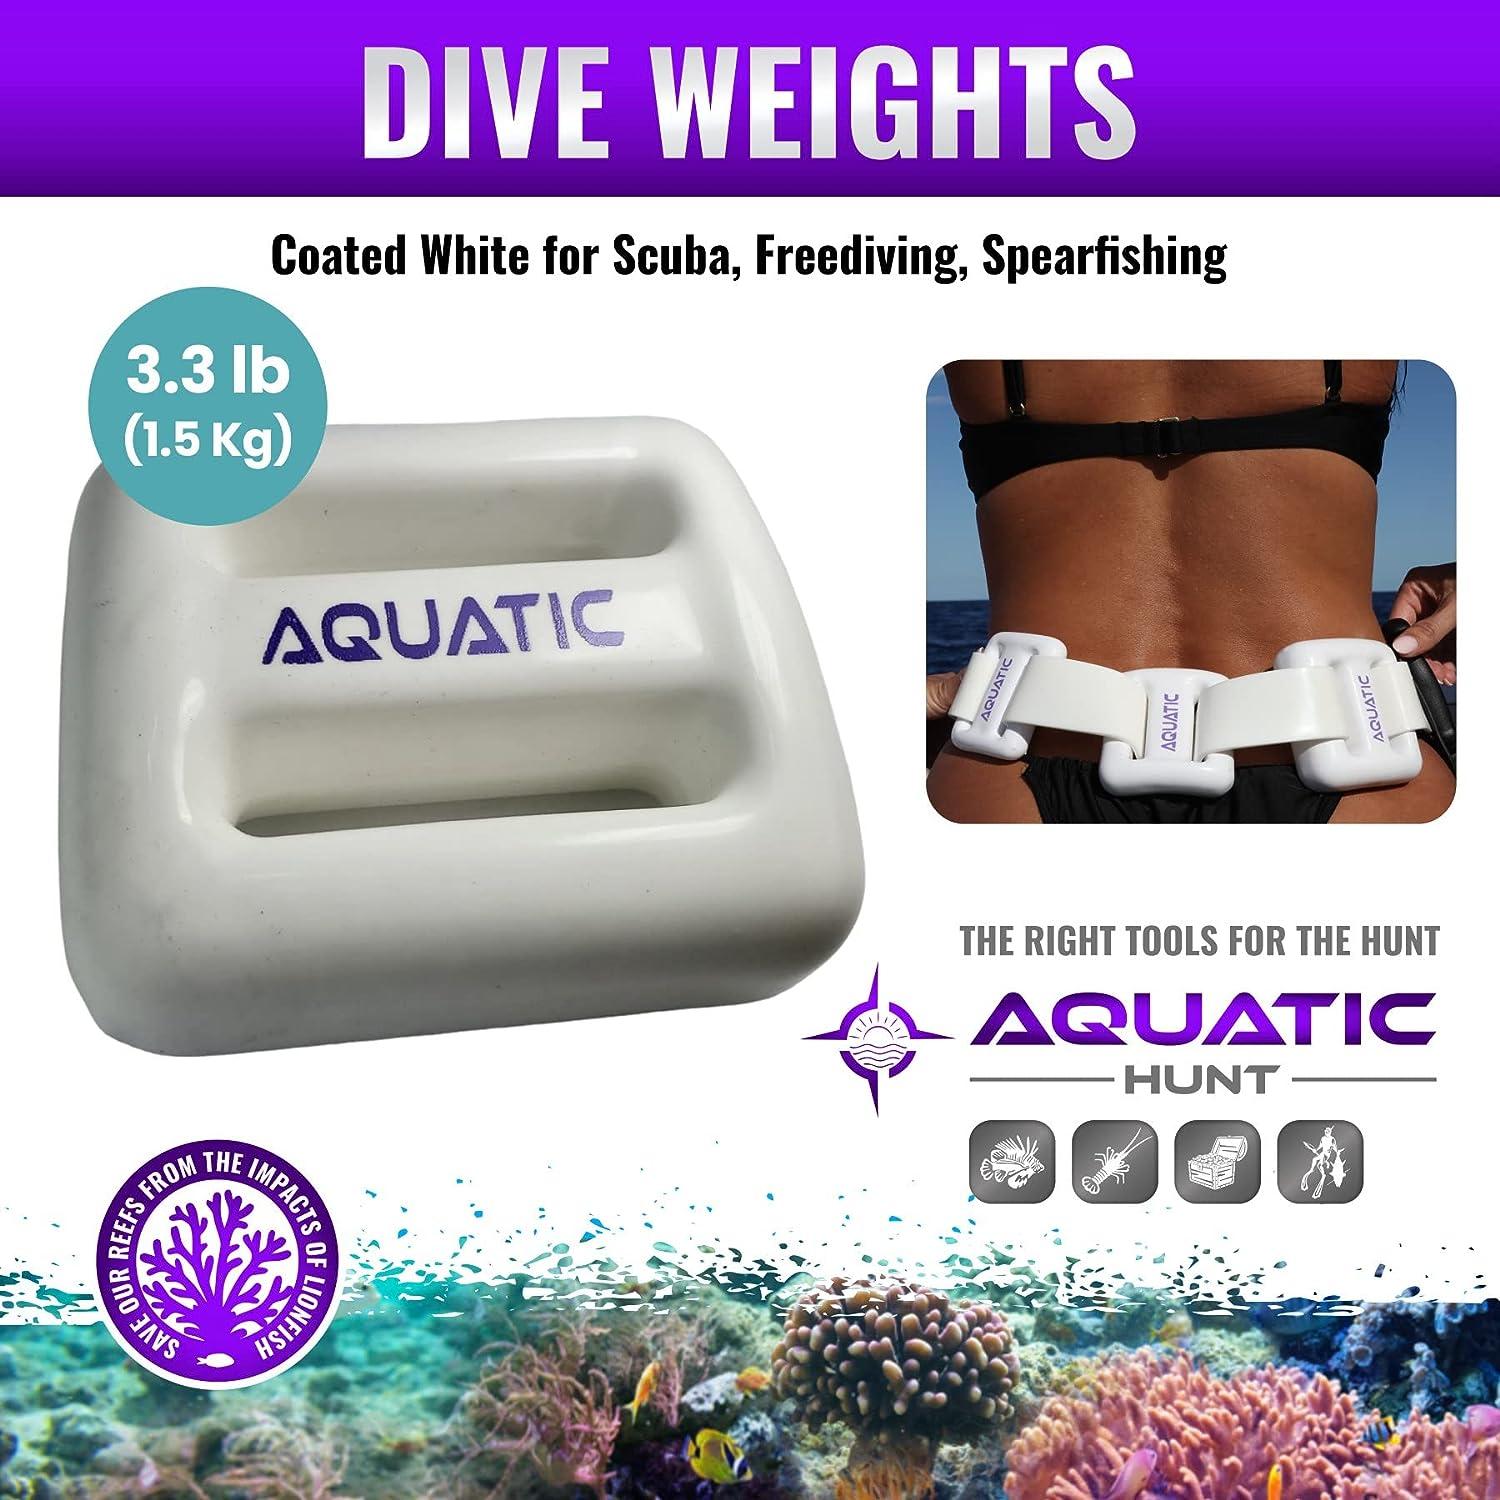 Arrow Weights Lead Weight Packages 24lbs (4x5lbs, 2x2lbs) perfect for Scuba  Diving BCs